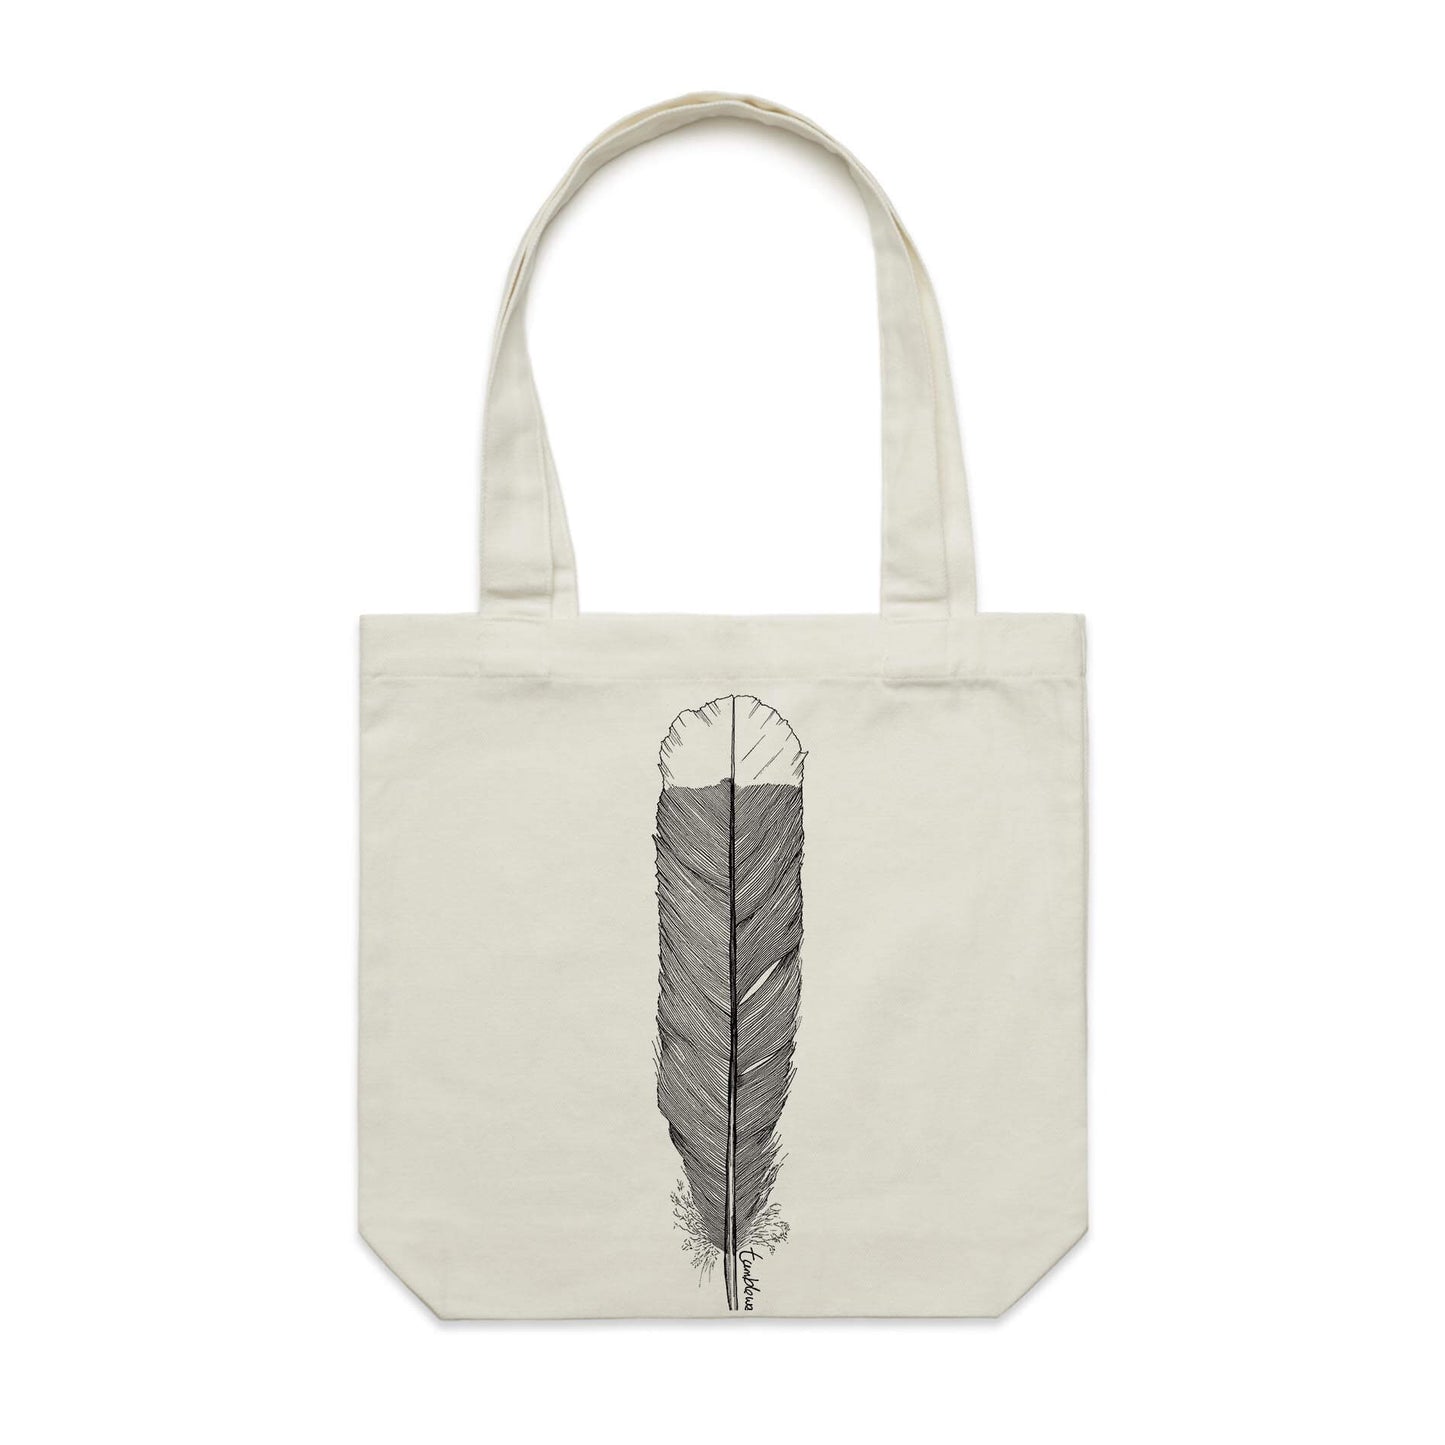 Cotton canvas tote bag with a screen printed Huia Feather design.